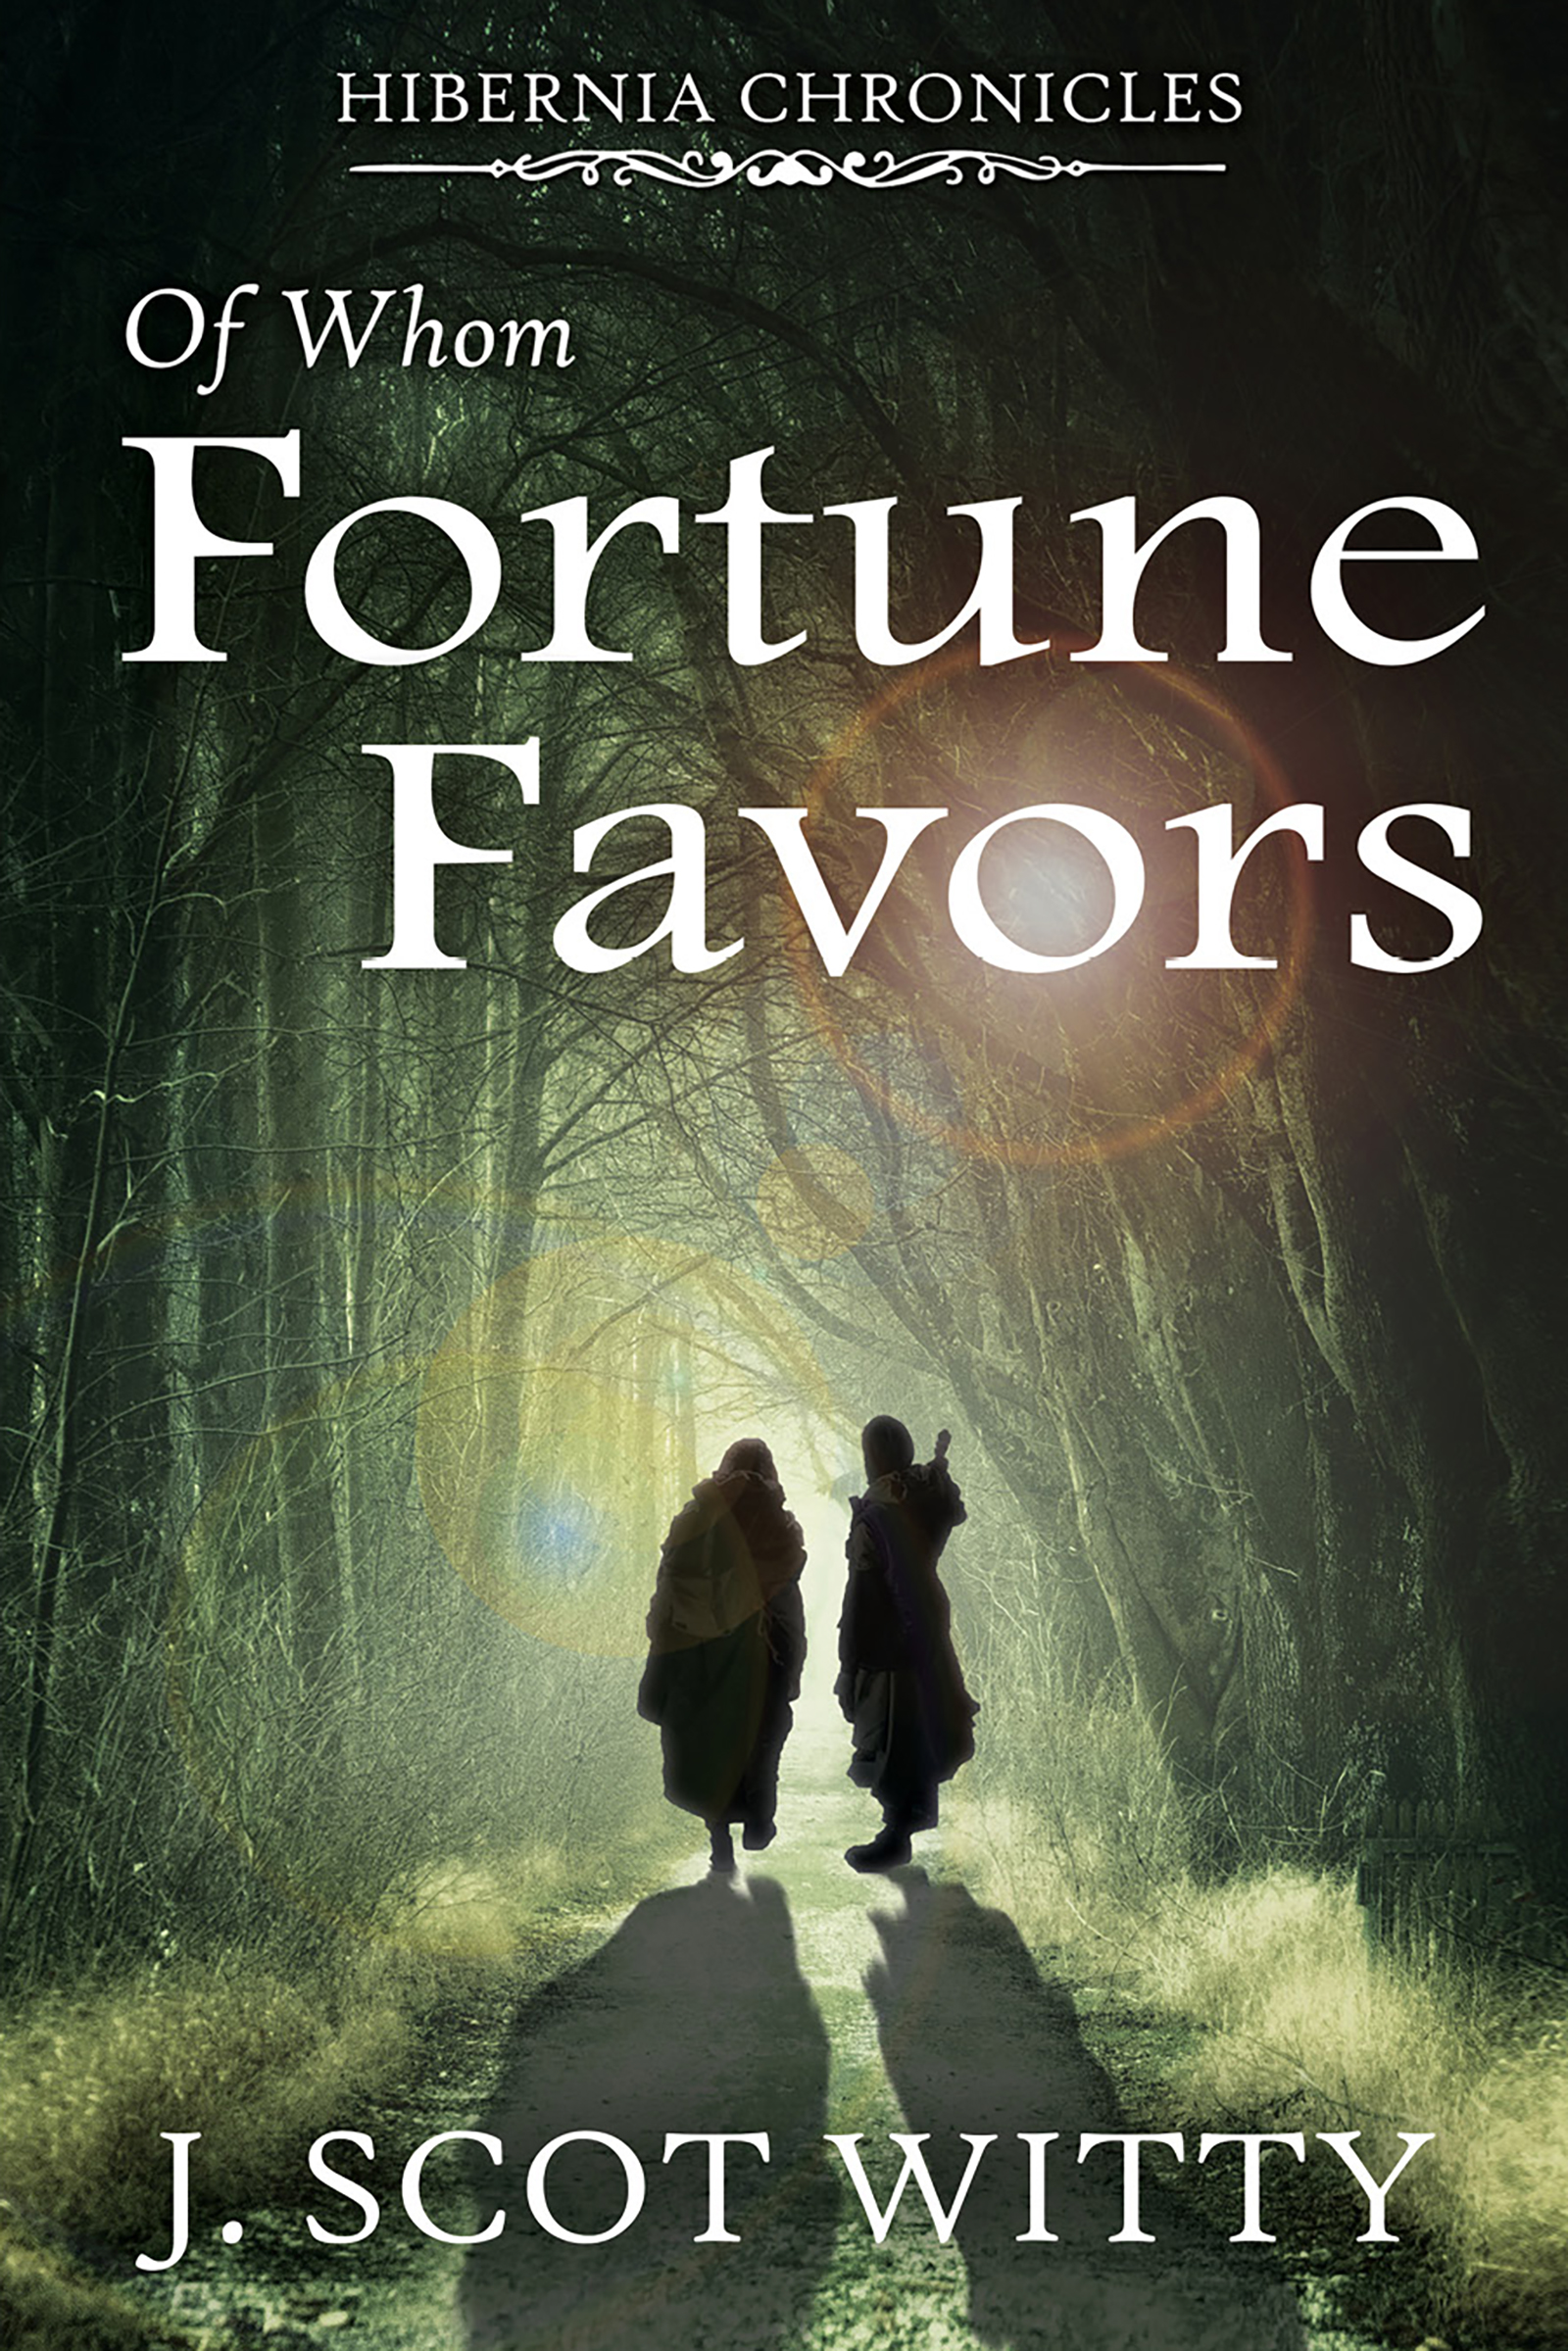 Of Whom Fortune Favors by J. Scot Witty